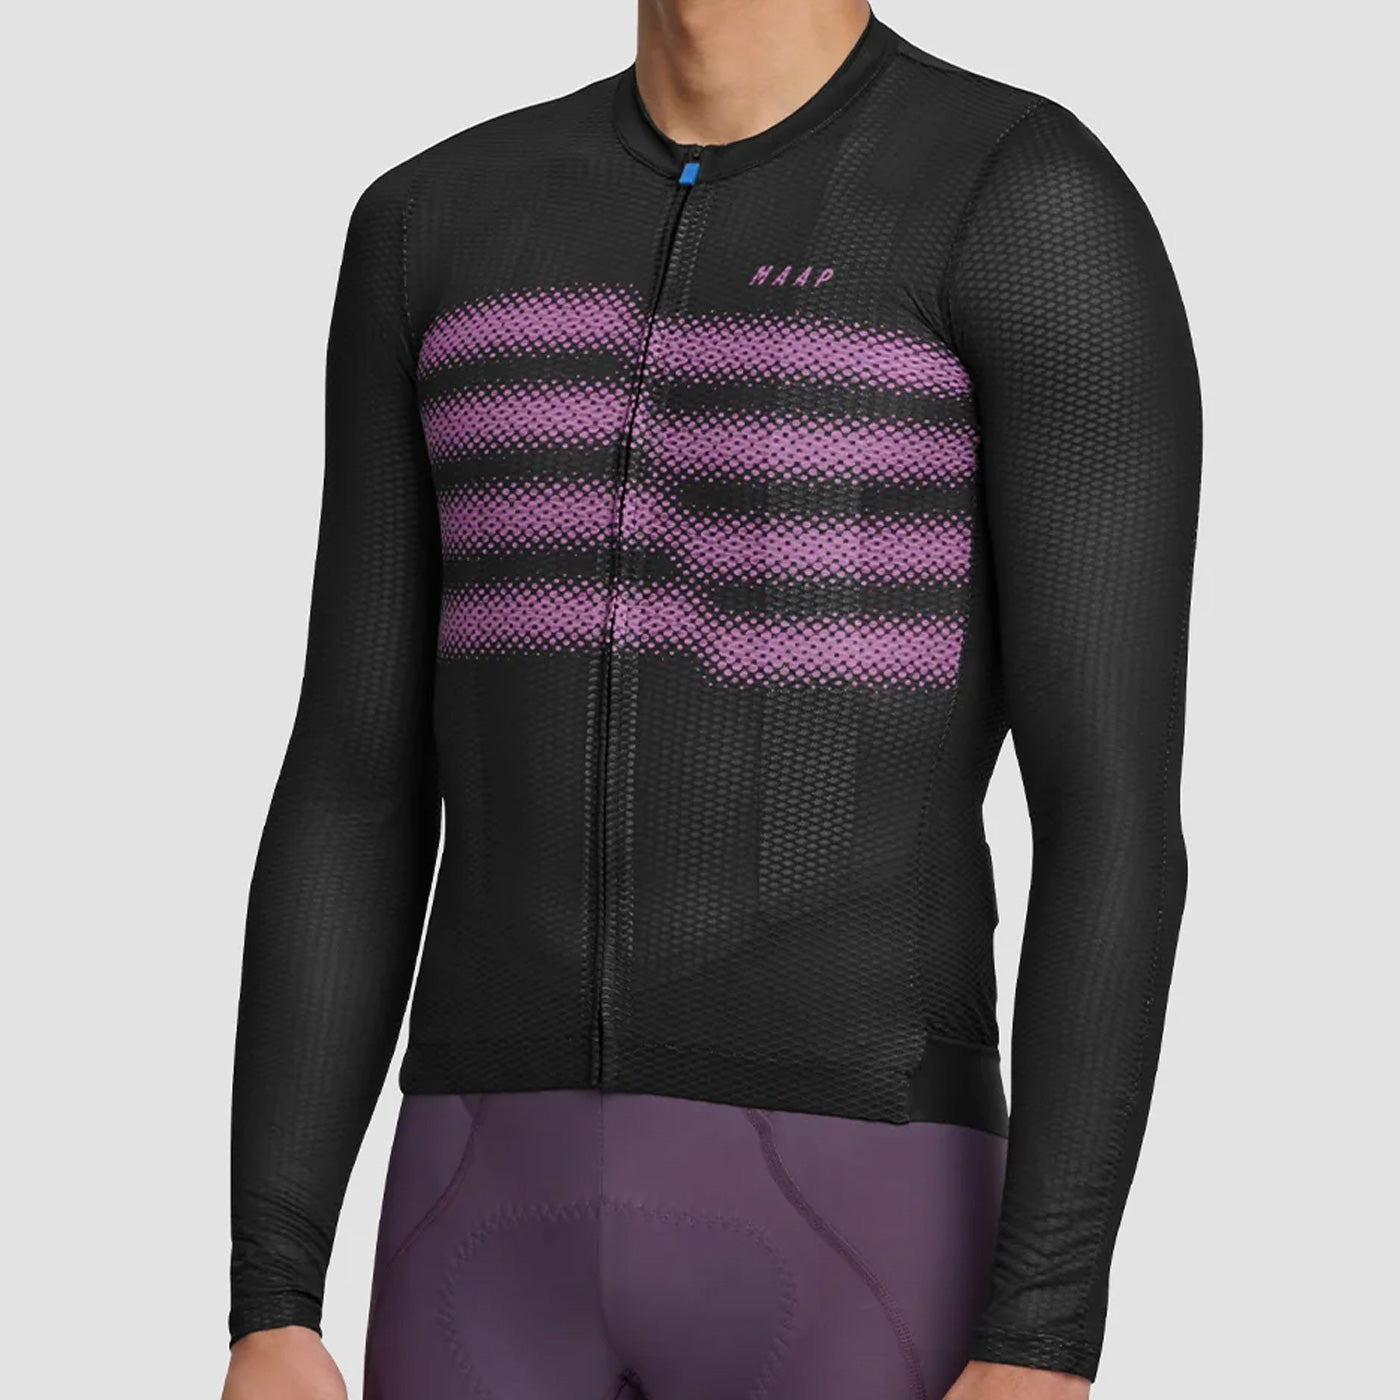 Maap Blurred Out Ultralight Pro long sleeve jersey - Black | All4cycling